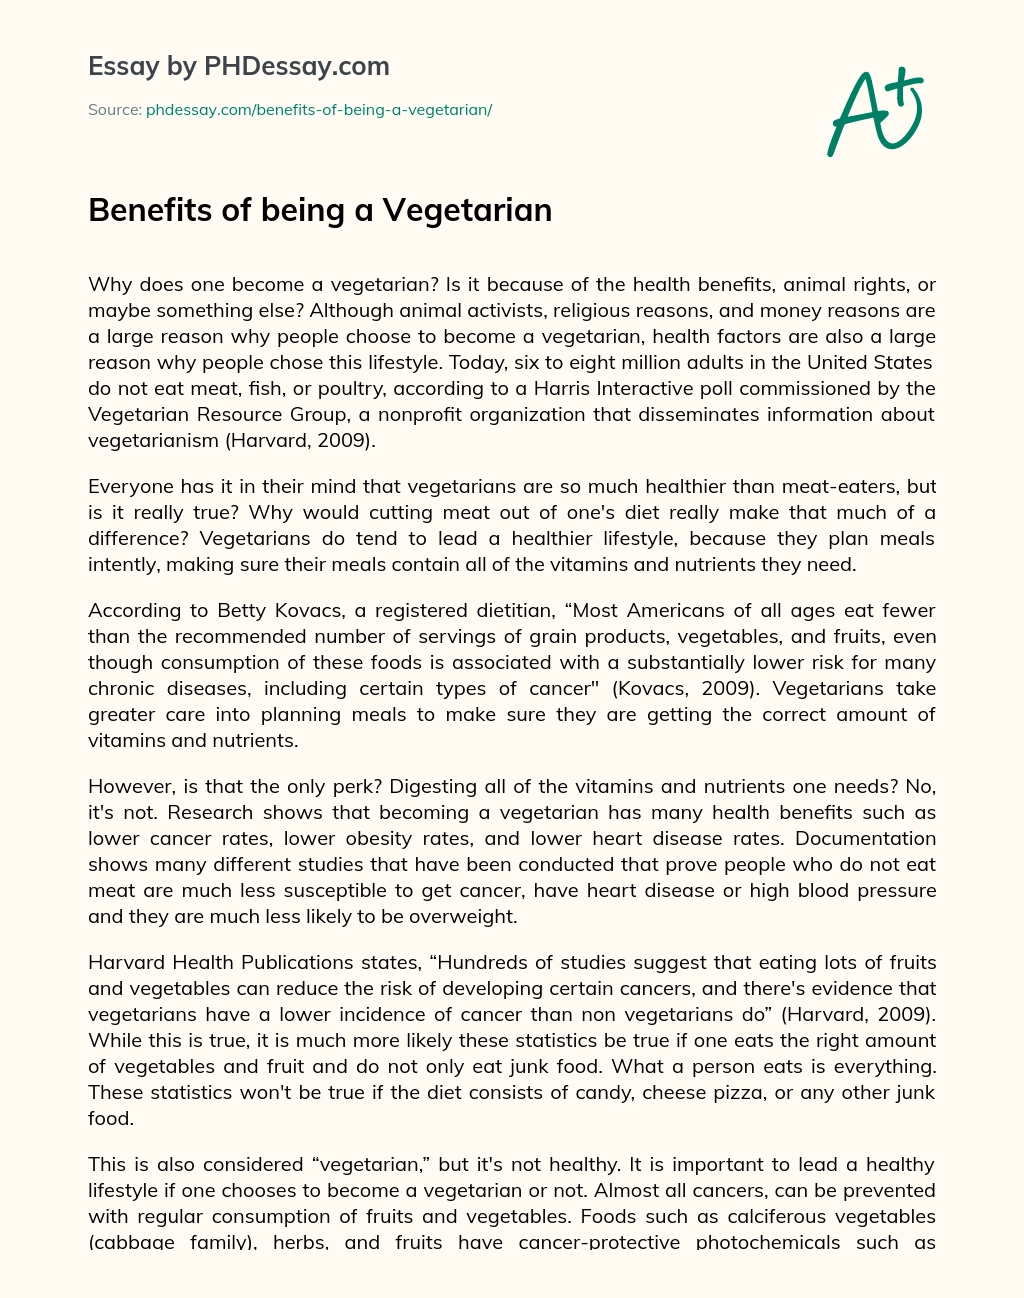 Benefits of being a Vegetarian essay